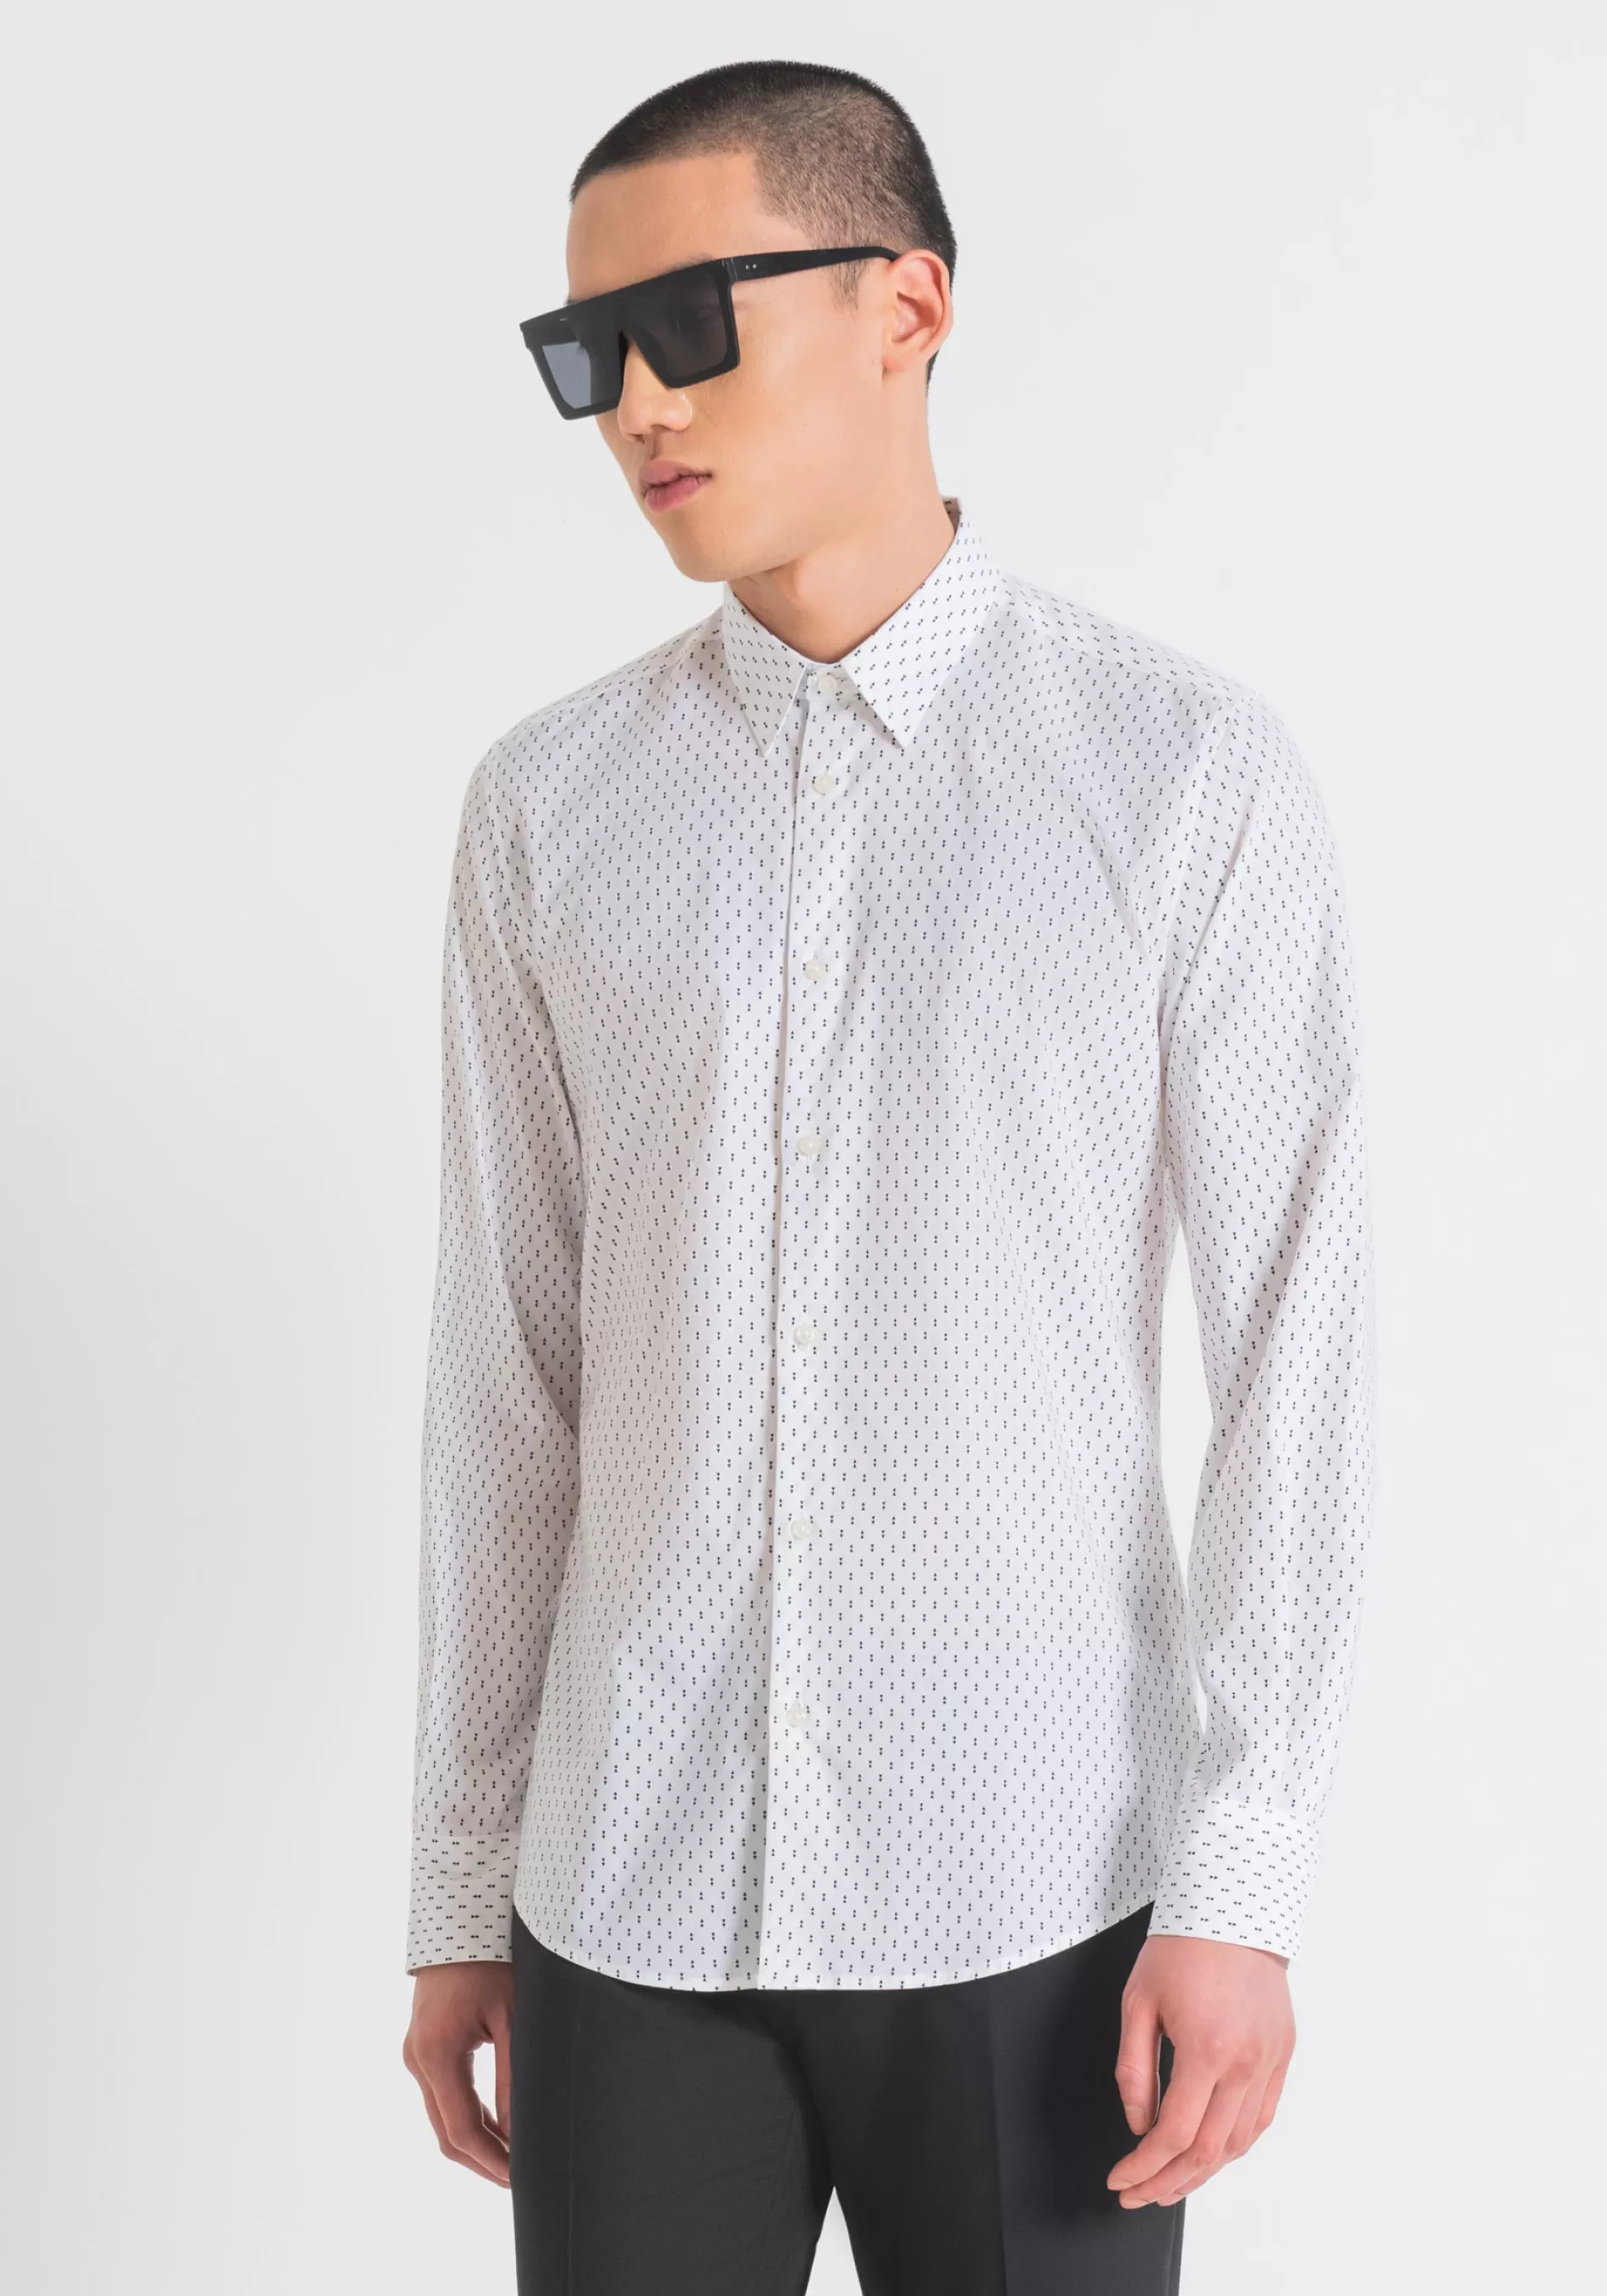 Fashion "NAPOLI" SLIM FIT SHIRT IN SOFT-FEEL COTTON WITH ALL-OVER MICRO PRINT Shirts